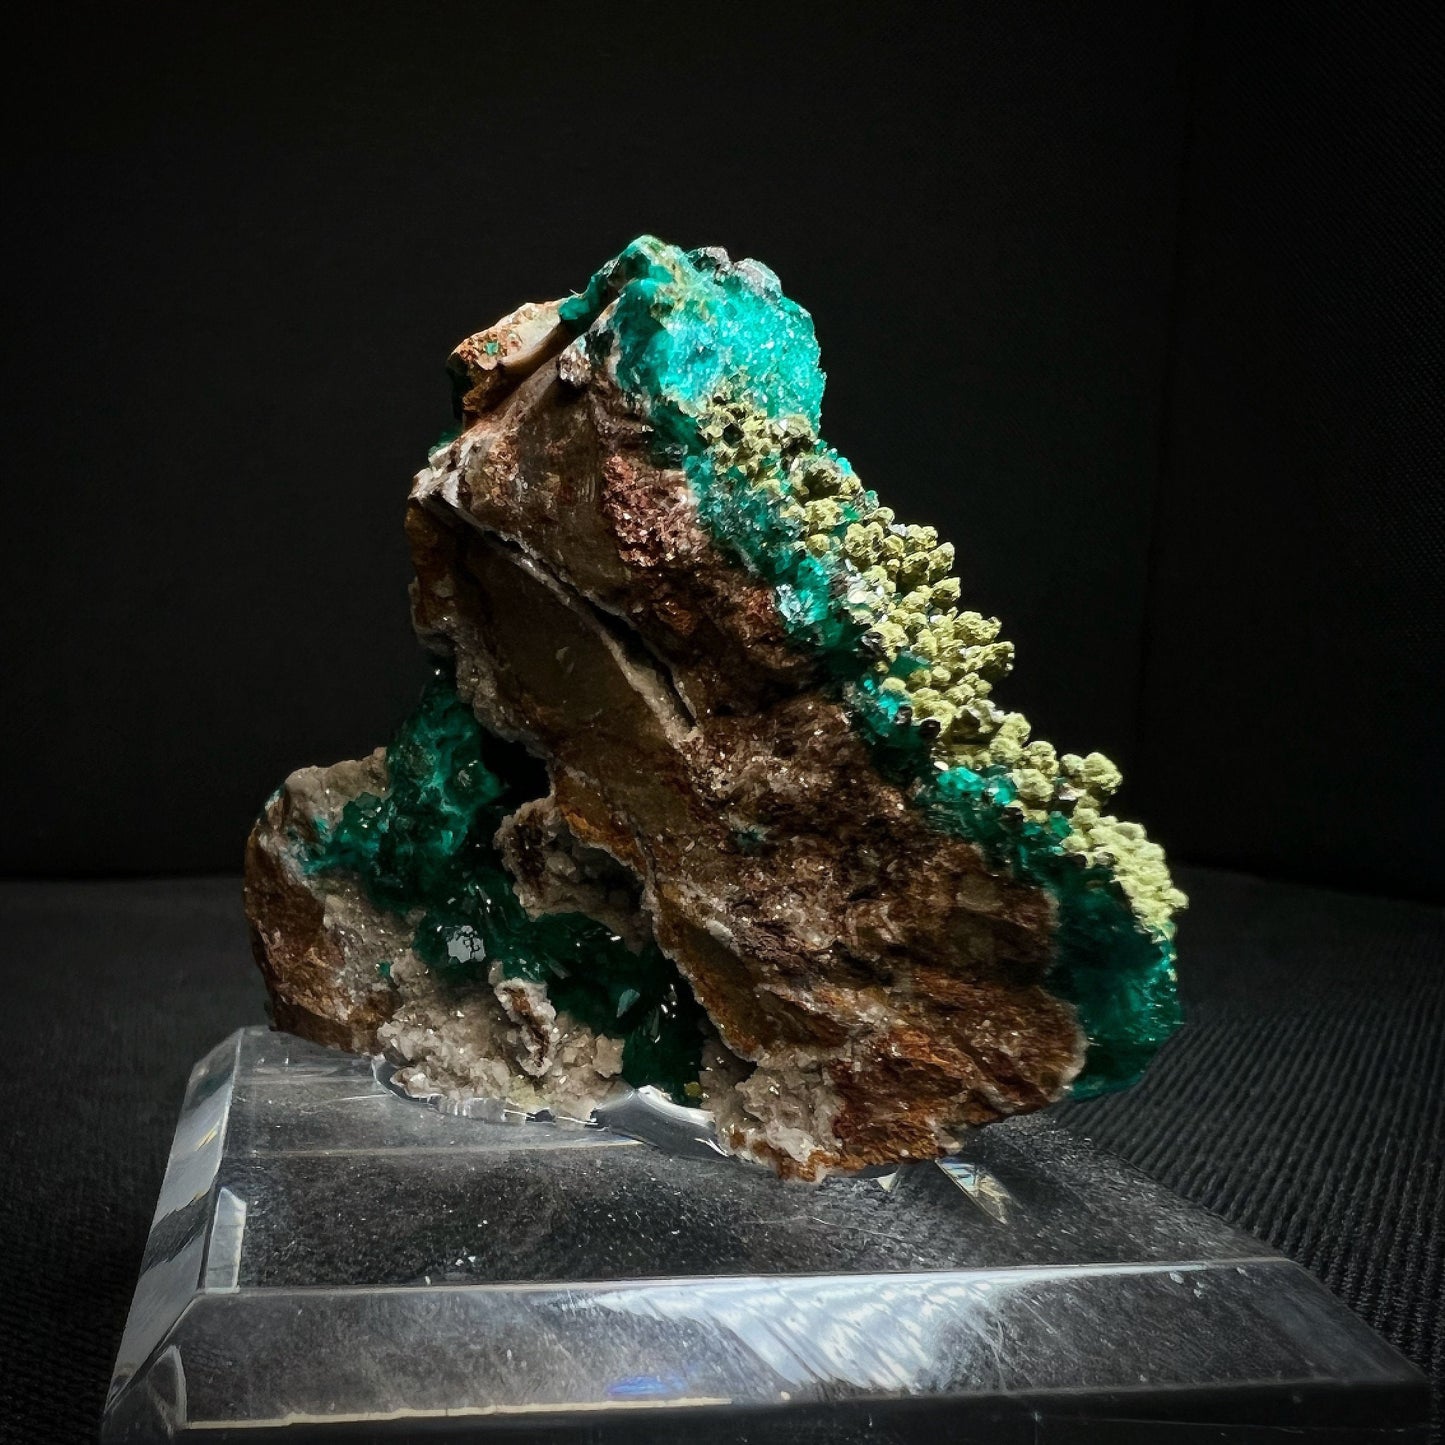 Dioptase With Mimetite From Congo-Collectors Piece, Home Décor, Crystal Healing (Stand Included)